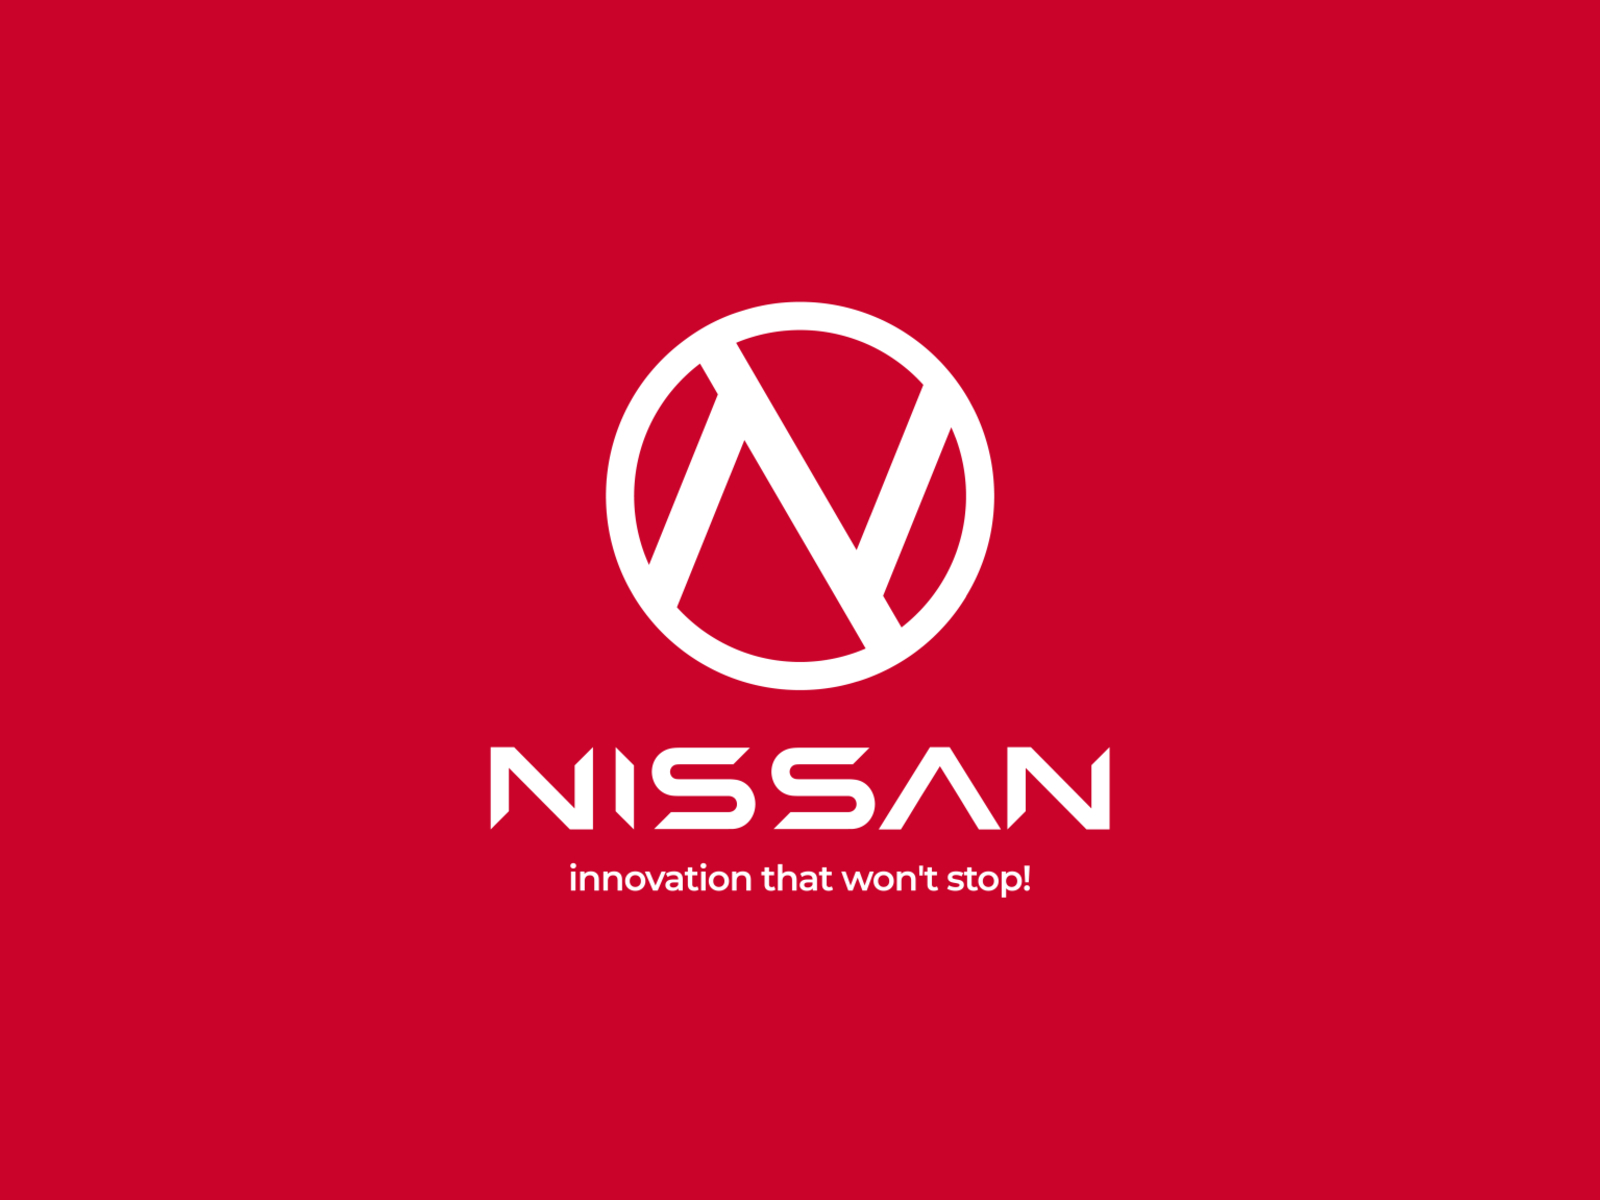 nissan redesign by usman qureshi on dribbble nissan redesign by usman qureshi on